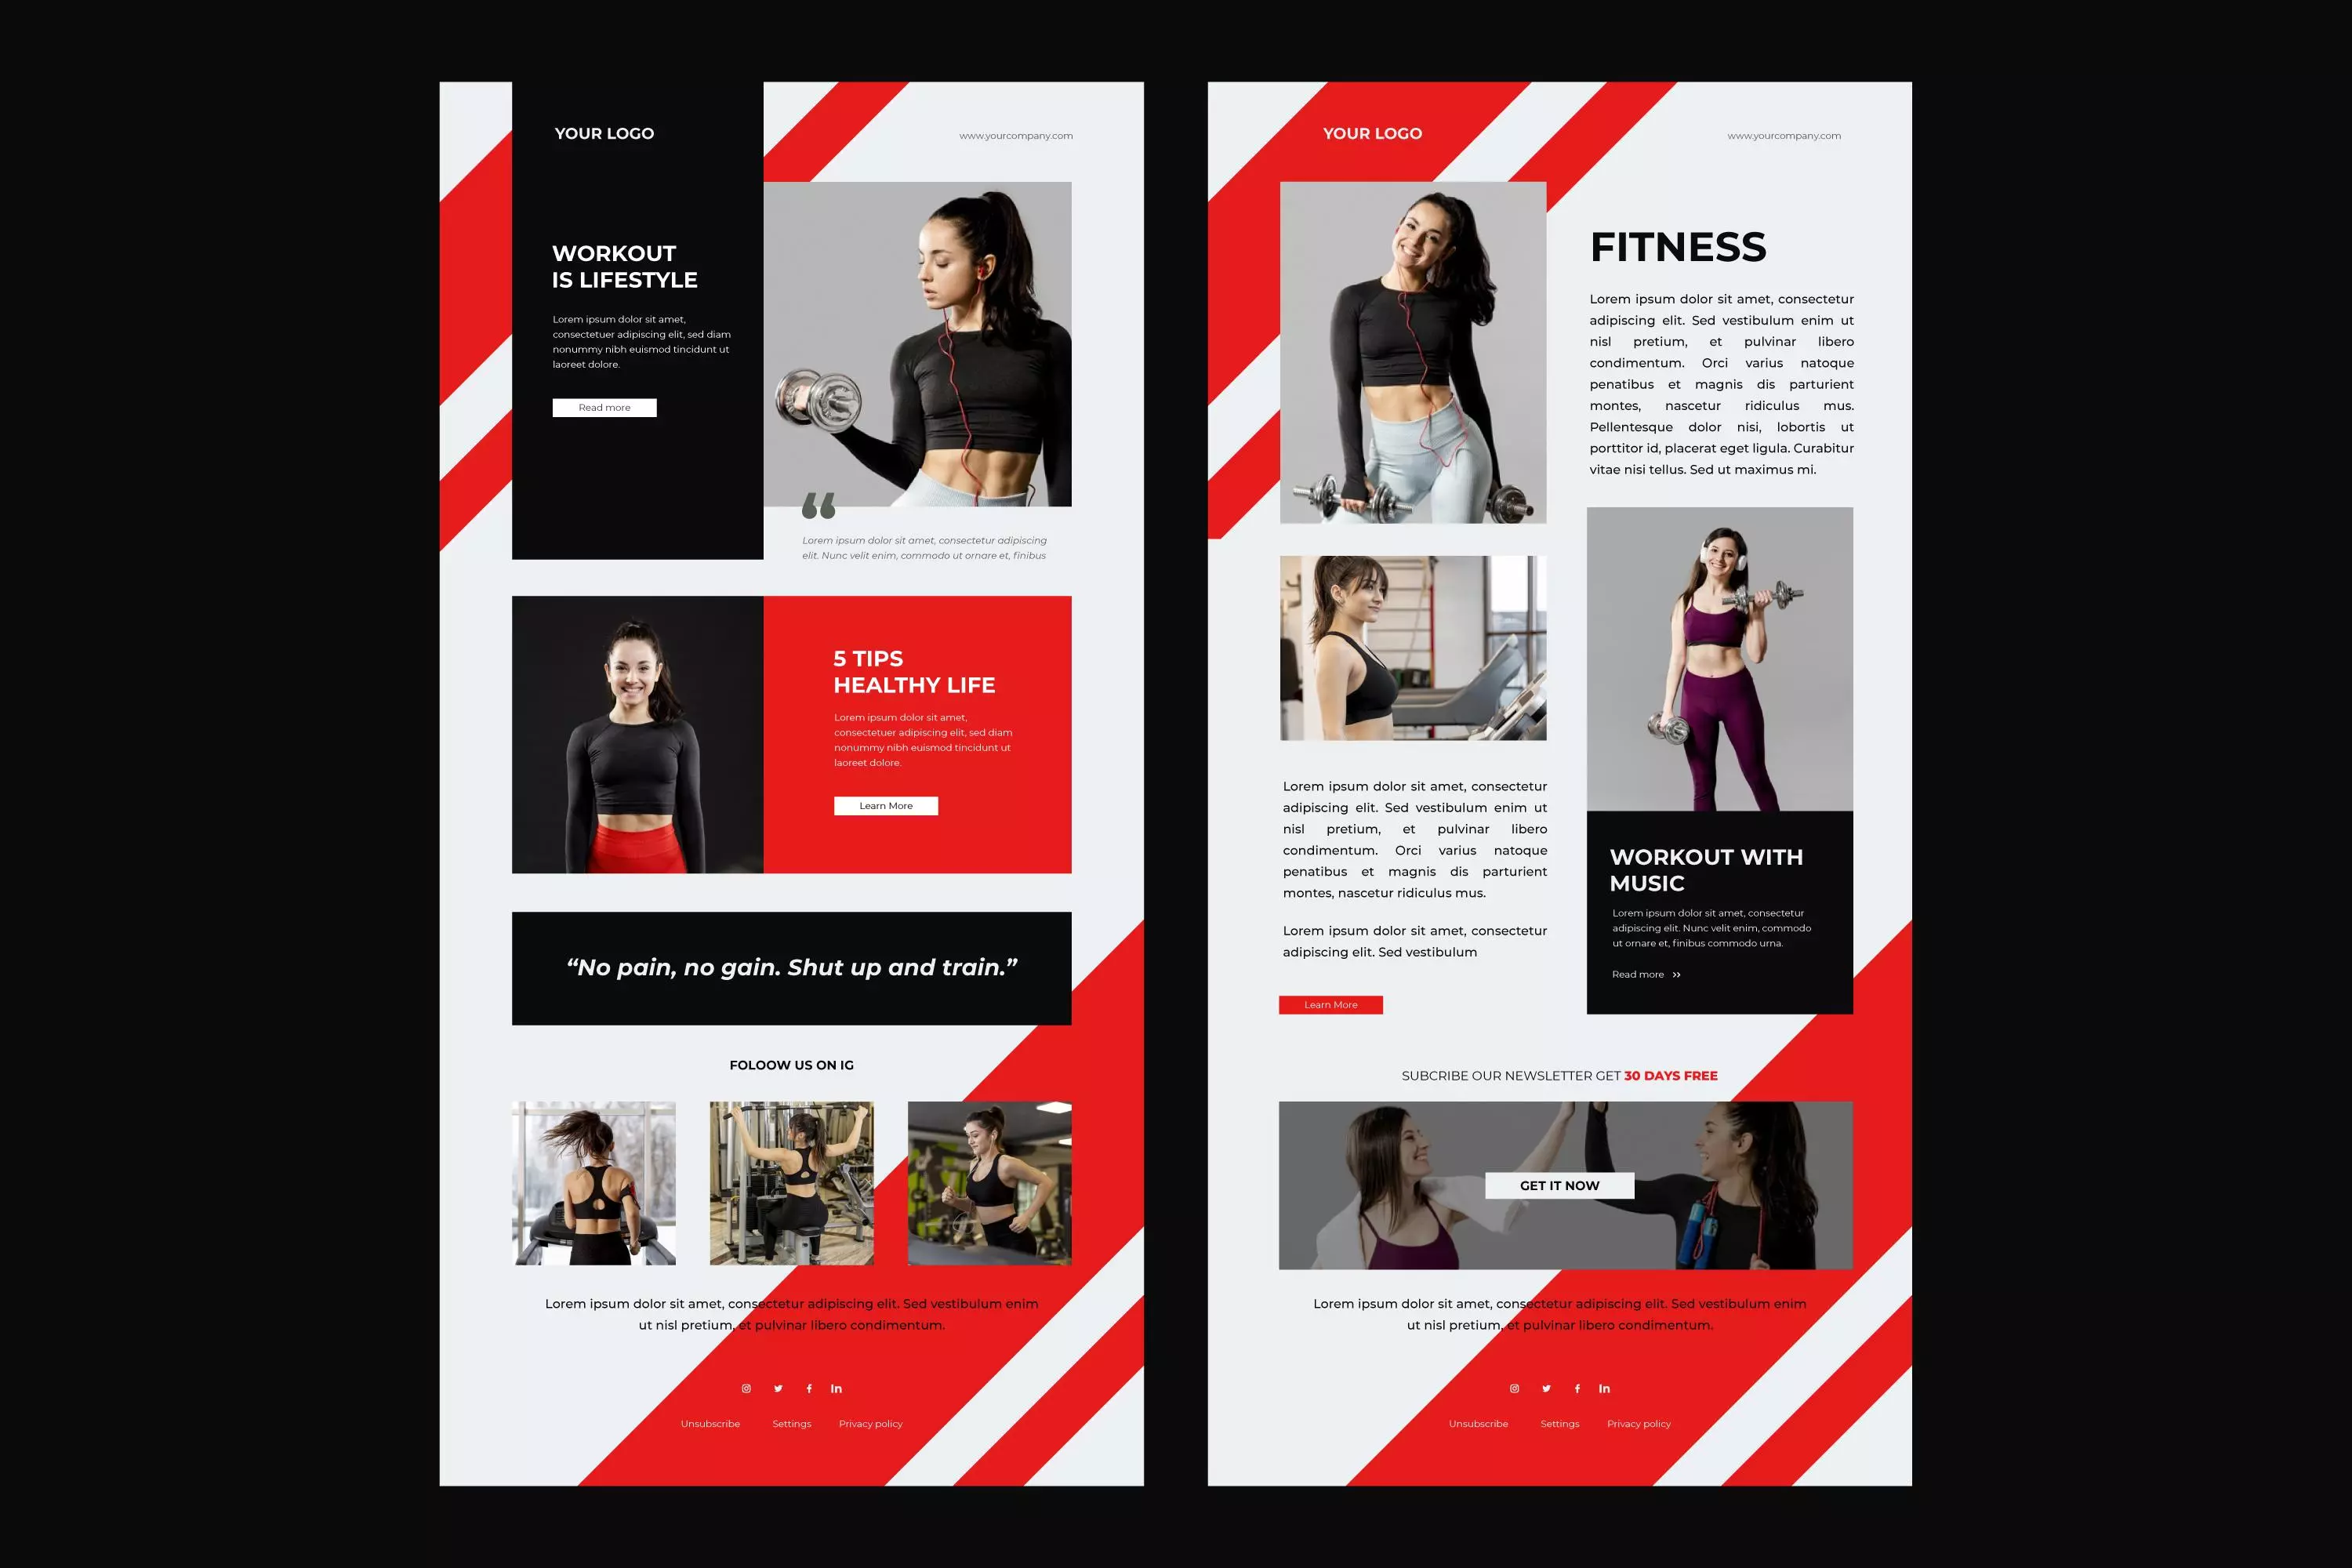 An email template for fitness bloggers